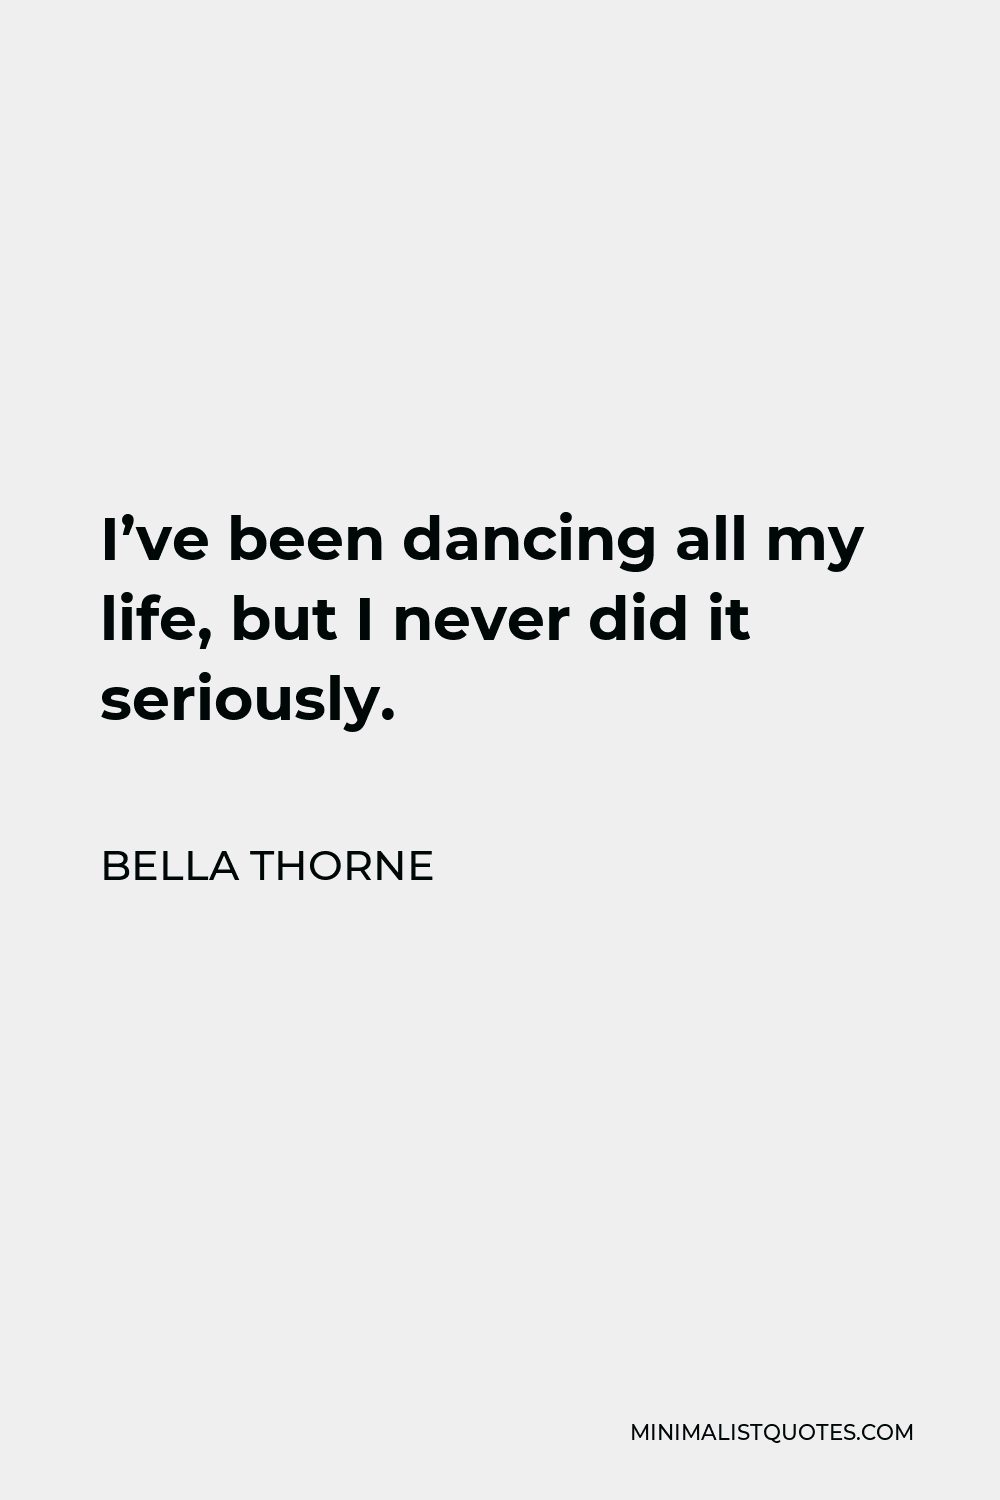 Bella Thorne Quote - I’ve been dancing all my life, but I never did it seriously.